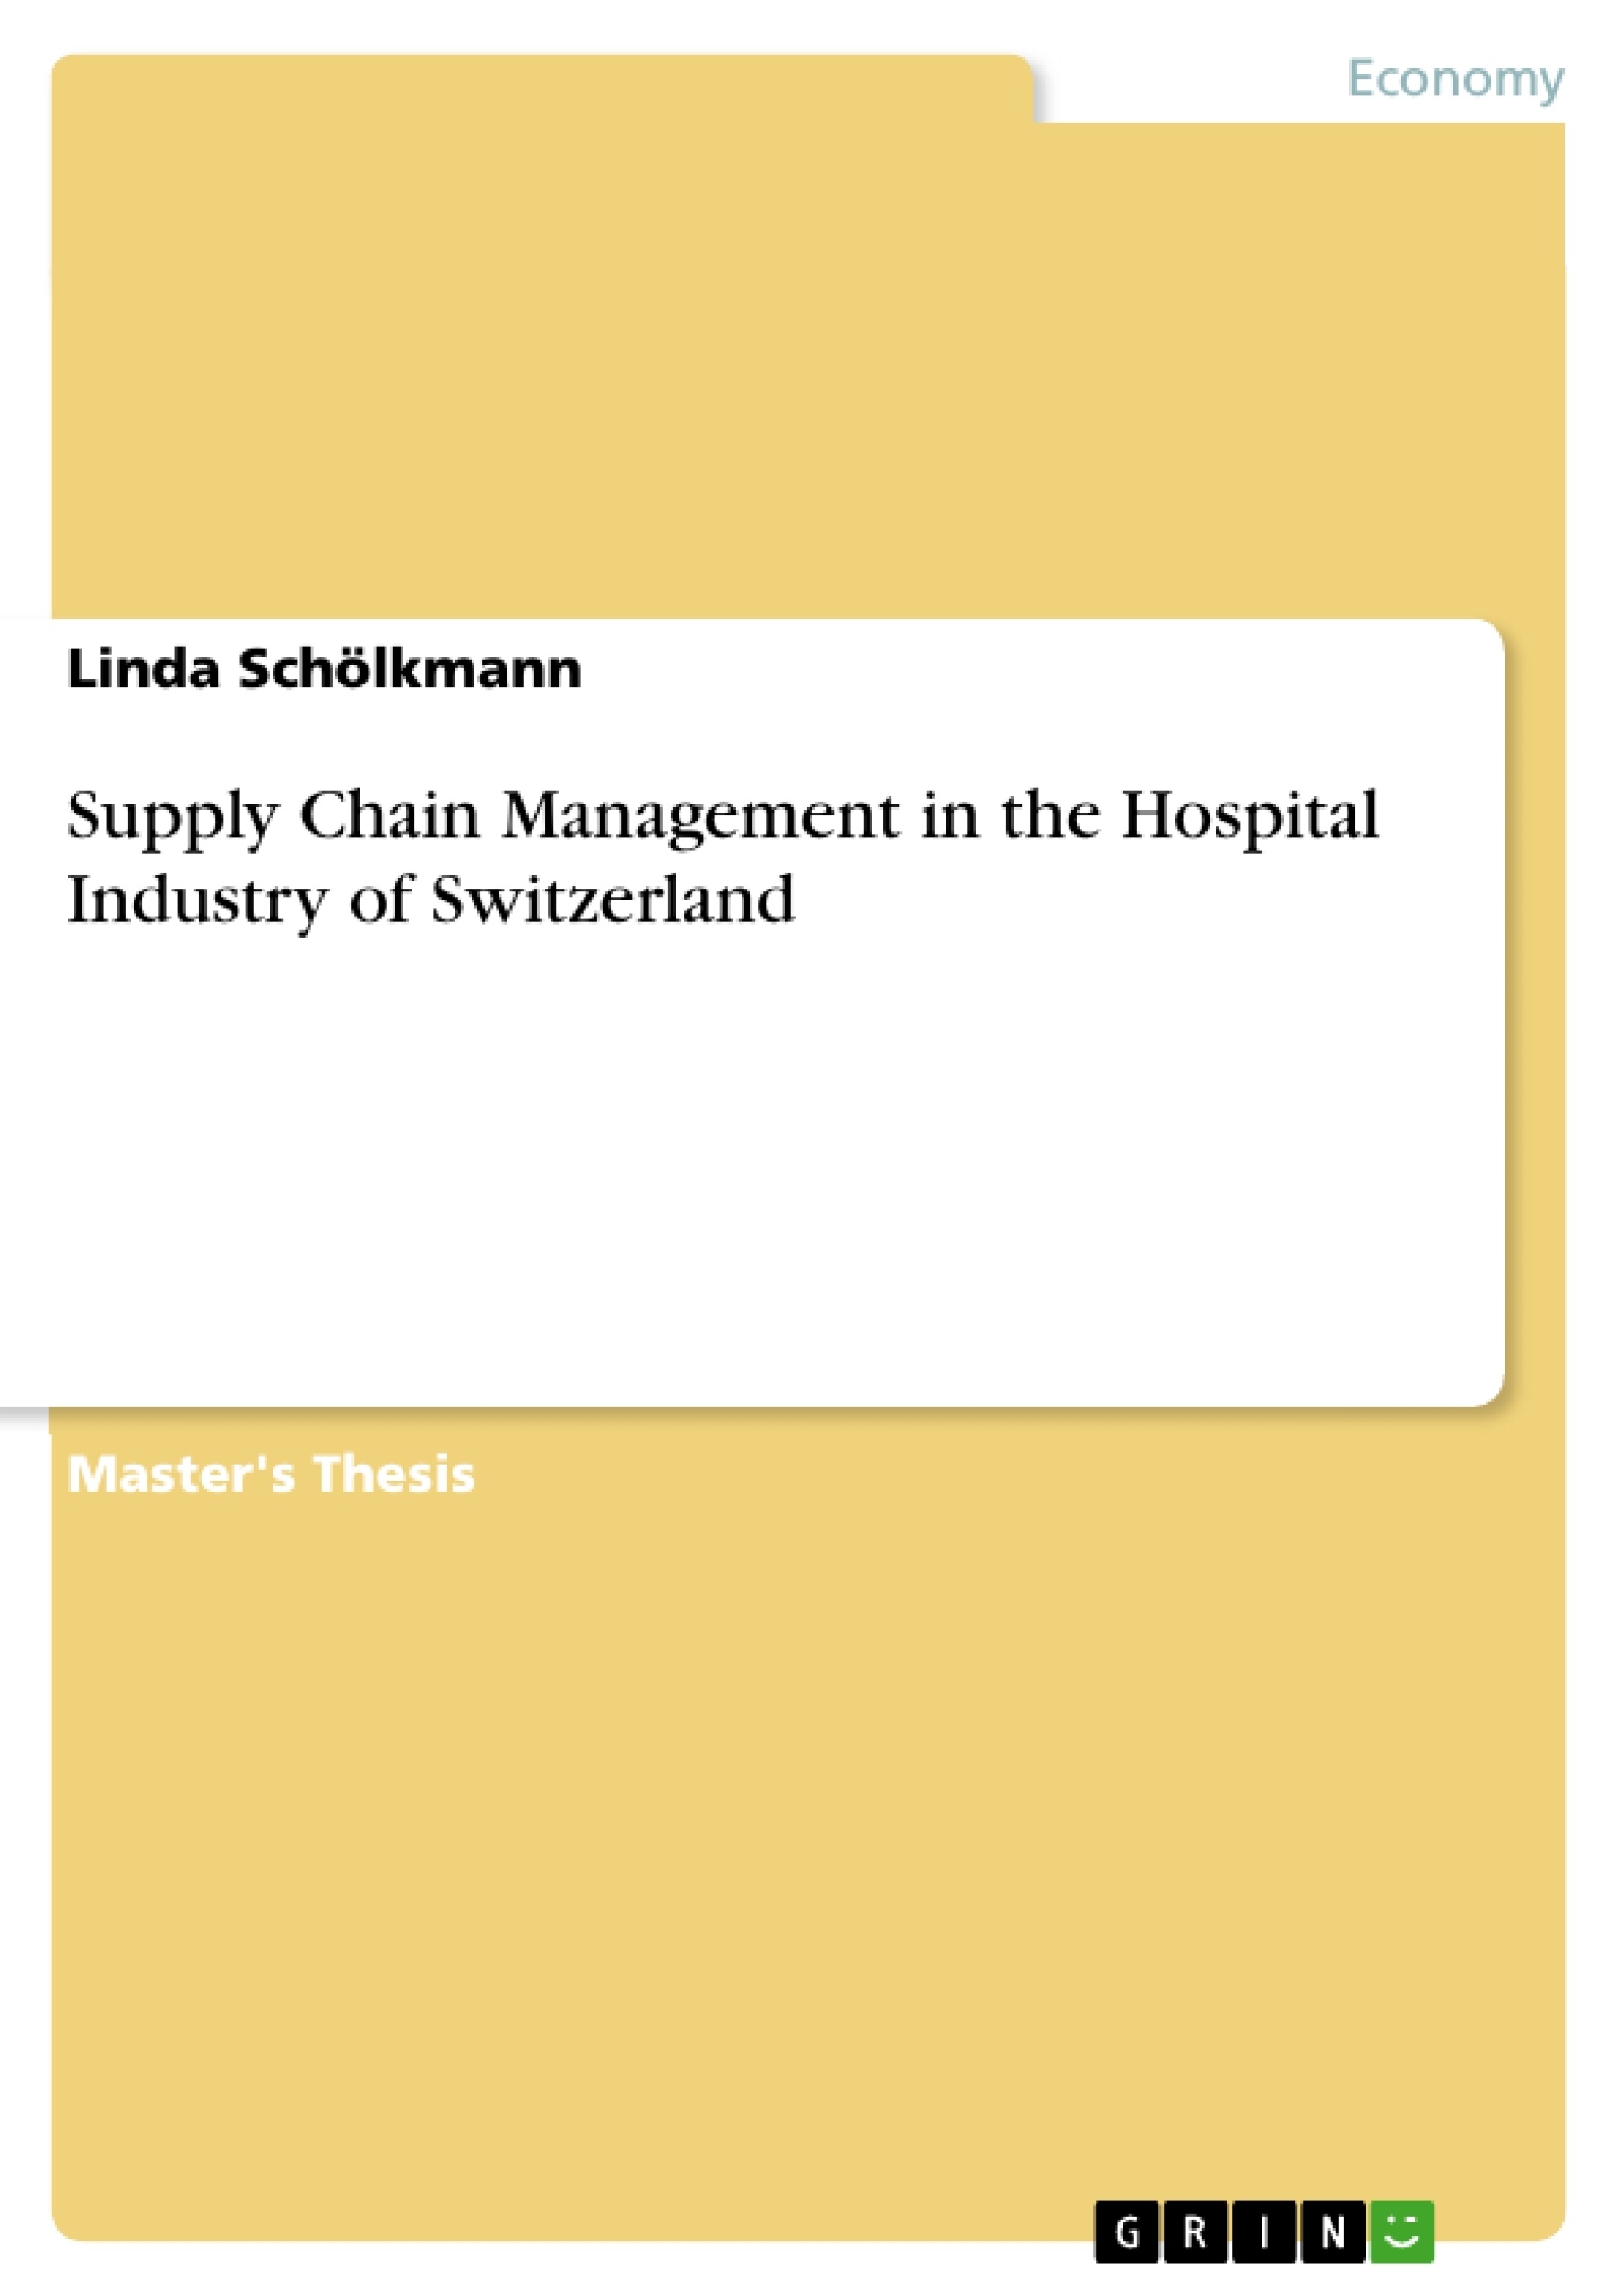 Título: Supply Chain Management in the Hospital Industry of Switzerland